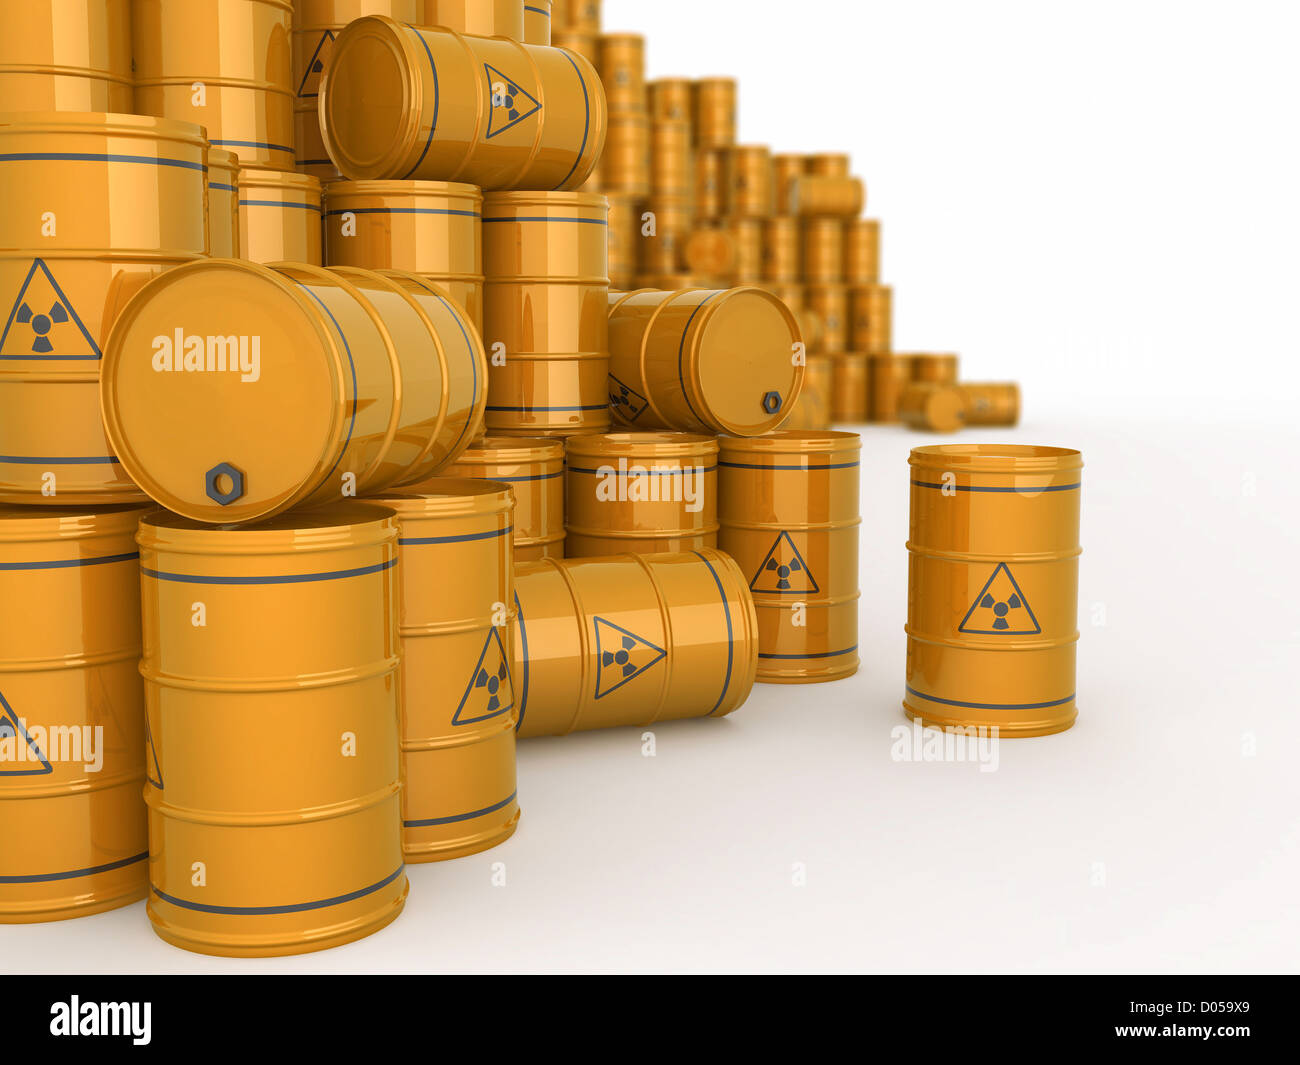 A barrels of radioactive waste on white background. 3d Stock Photo